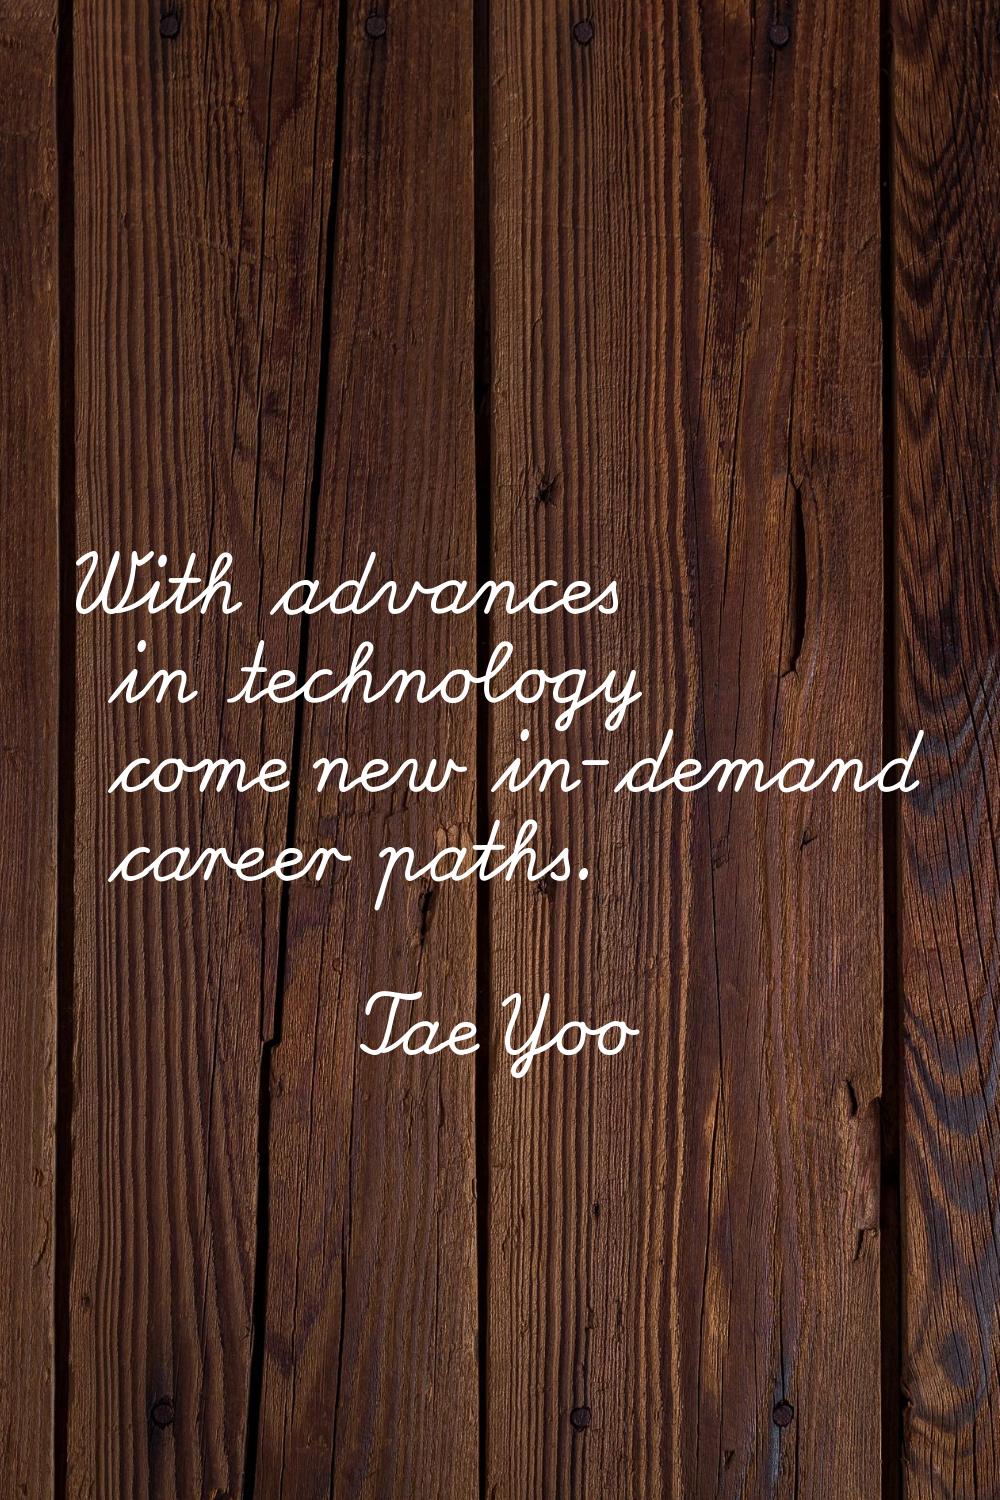 With advances in technology come new in-demand career paths.